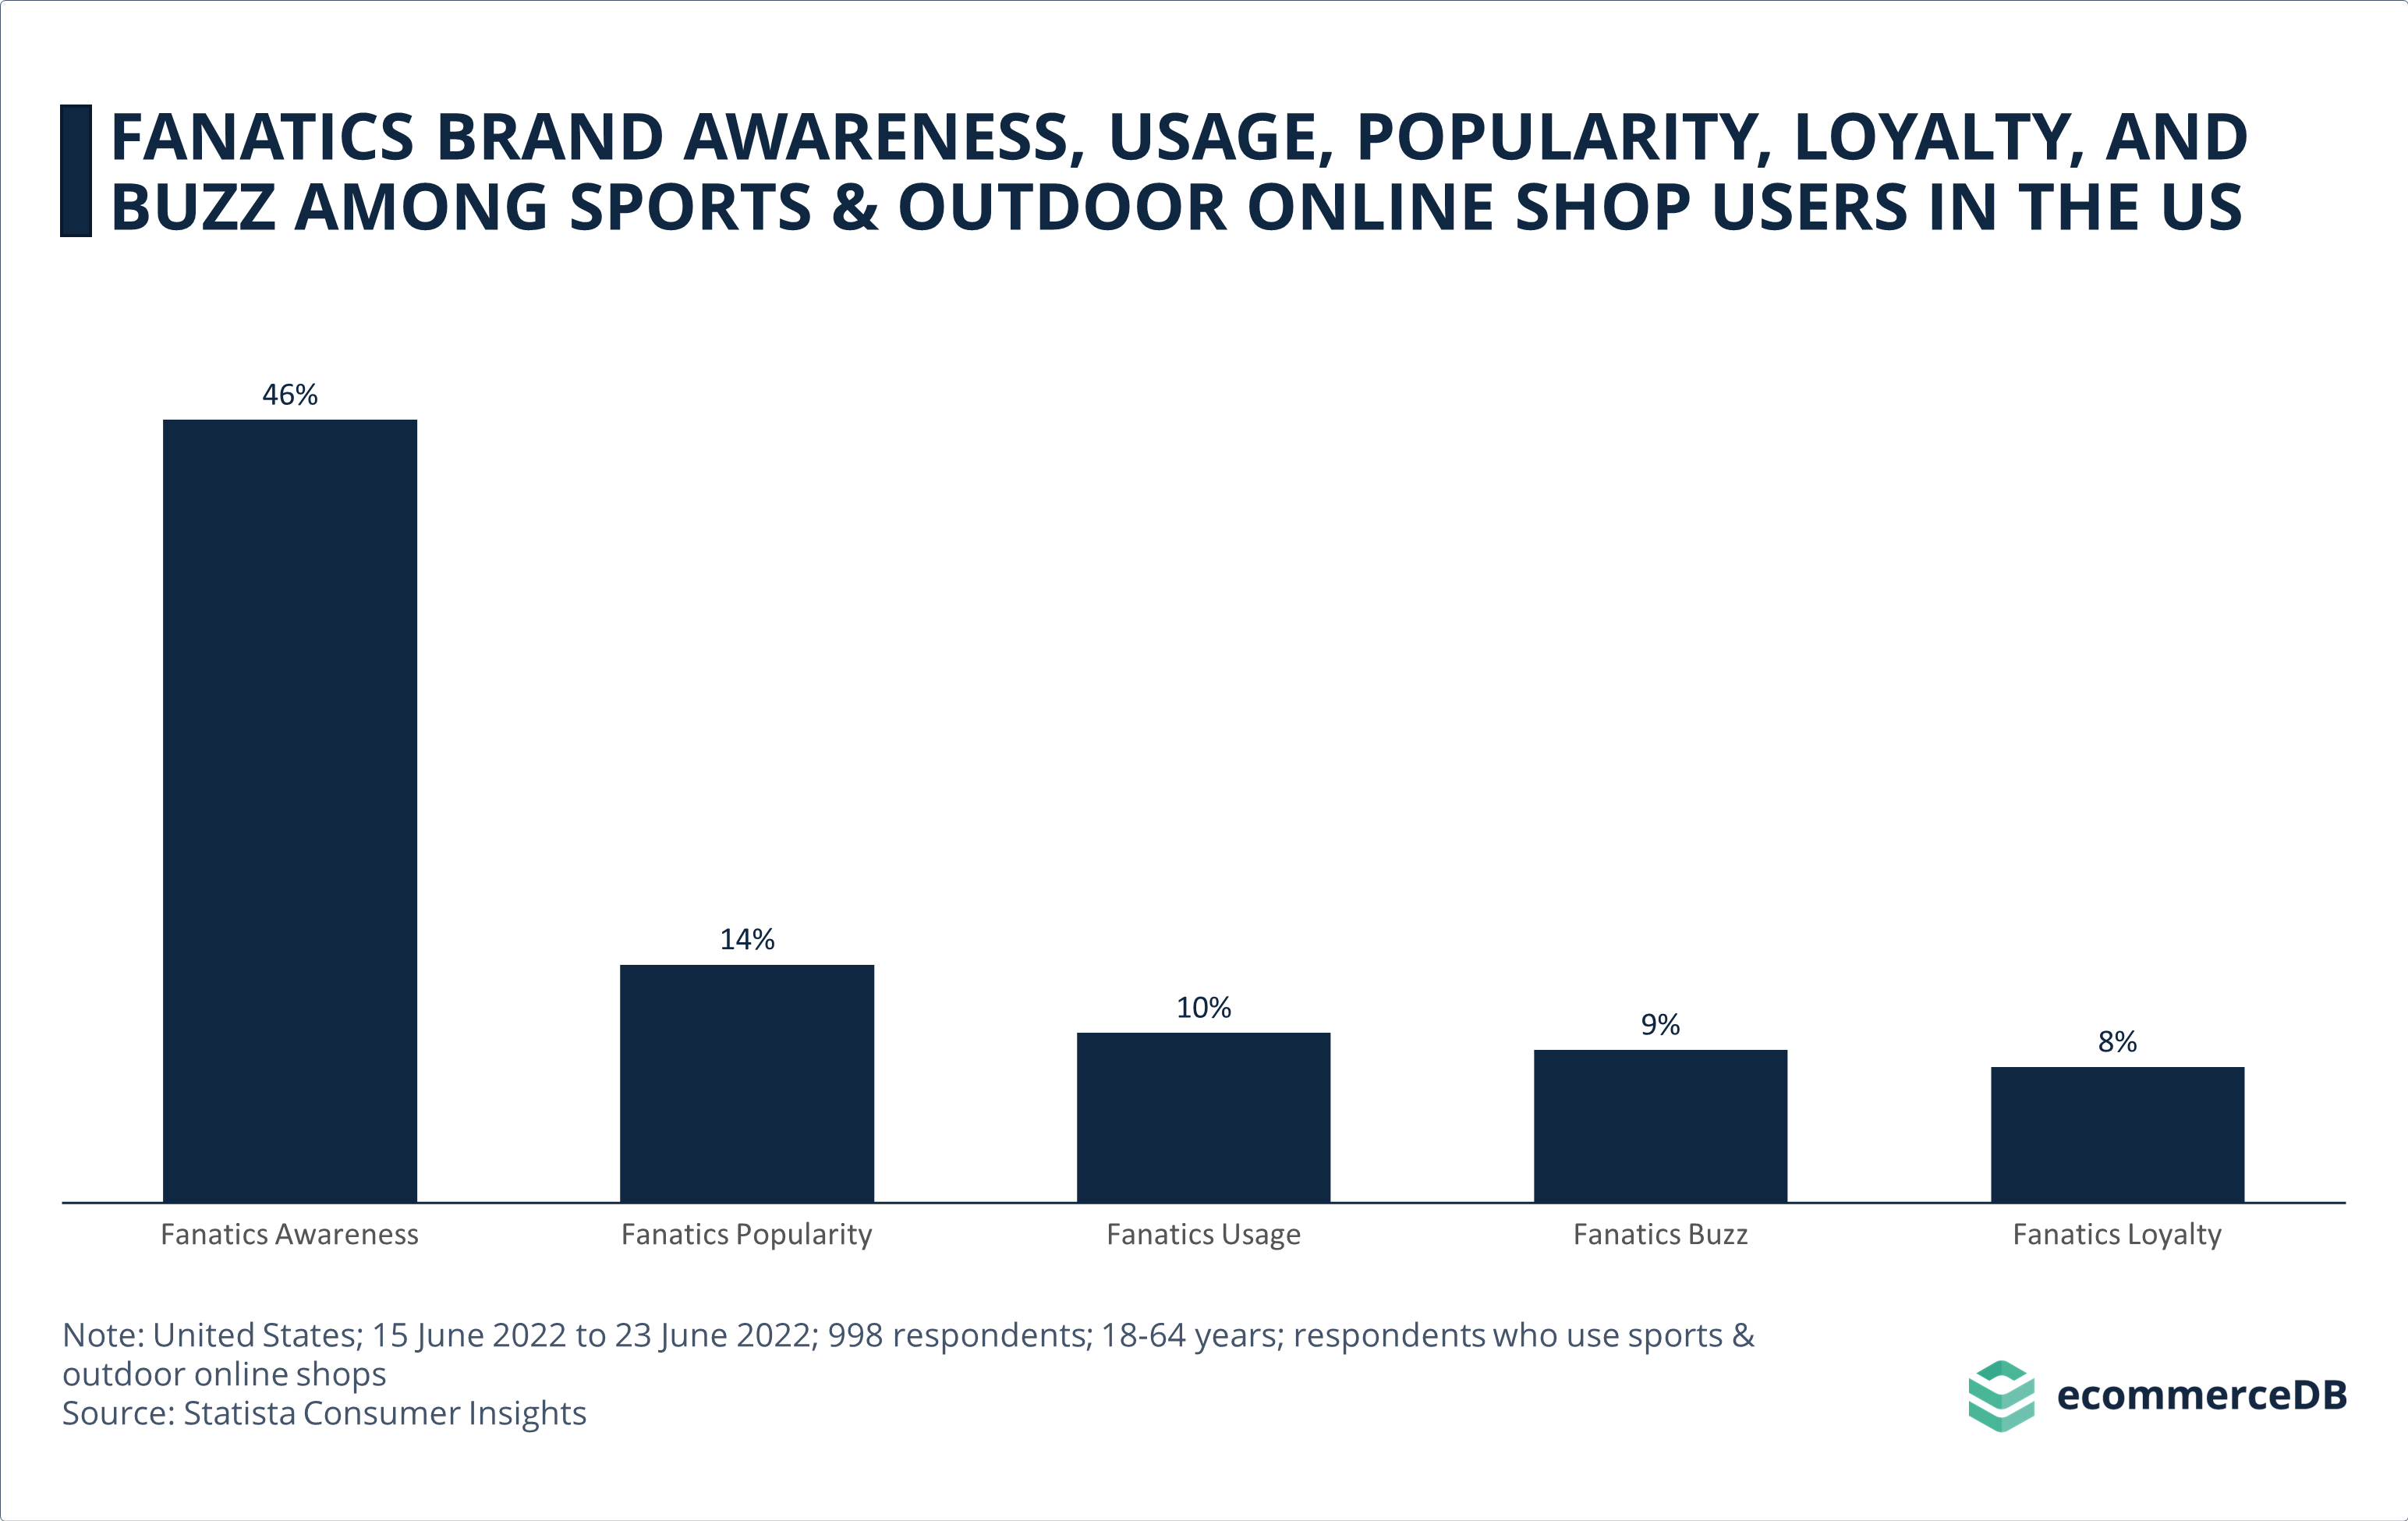 Fanatics Brand Awareness, Usage, Popularity, Loyalty, and Buzz Among Sports & Outdoor Online Shop Users in the US